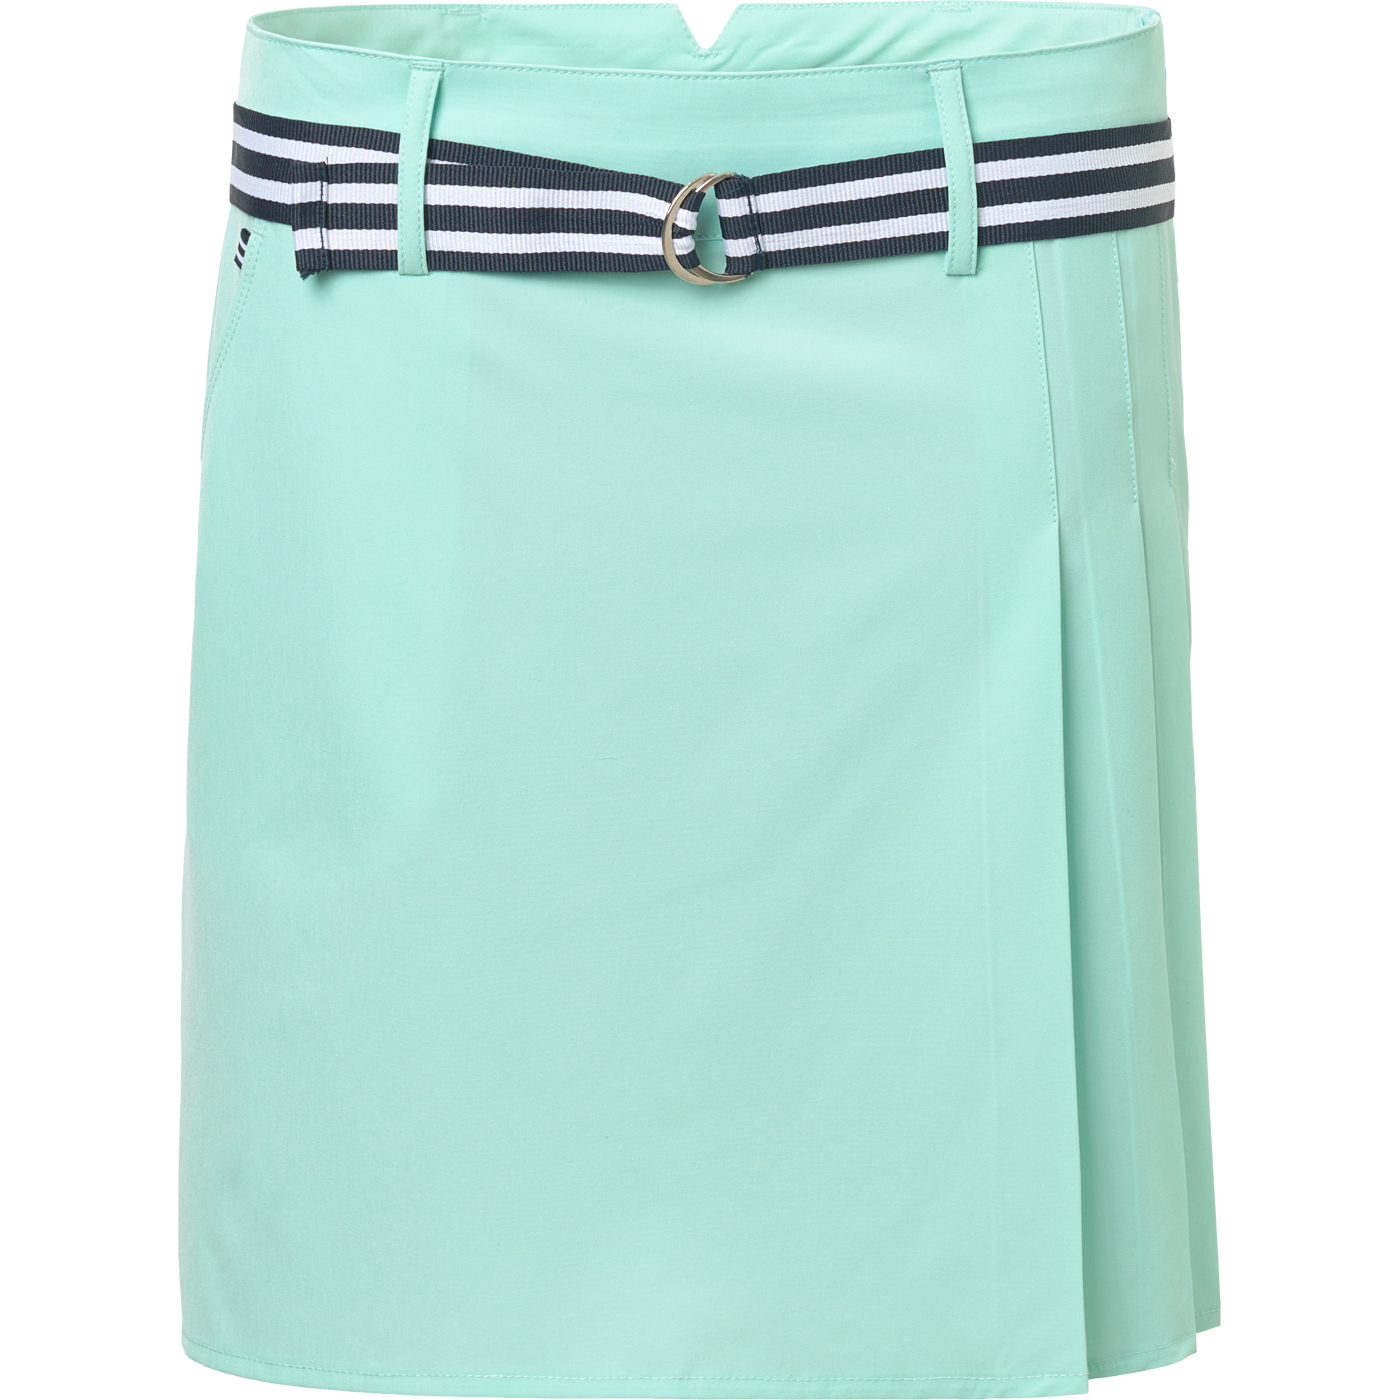 Lds Kildare skort 45cm - breeze in the group WOMEN / All clothing at Abacus Sportswear (2978343)